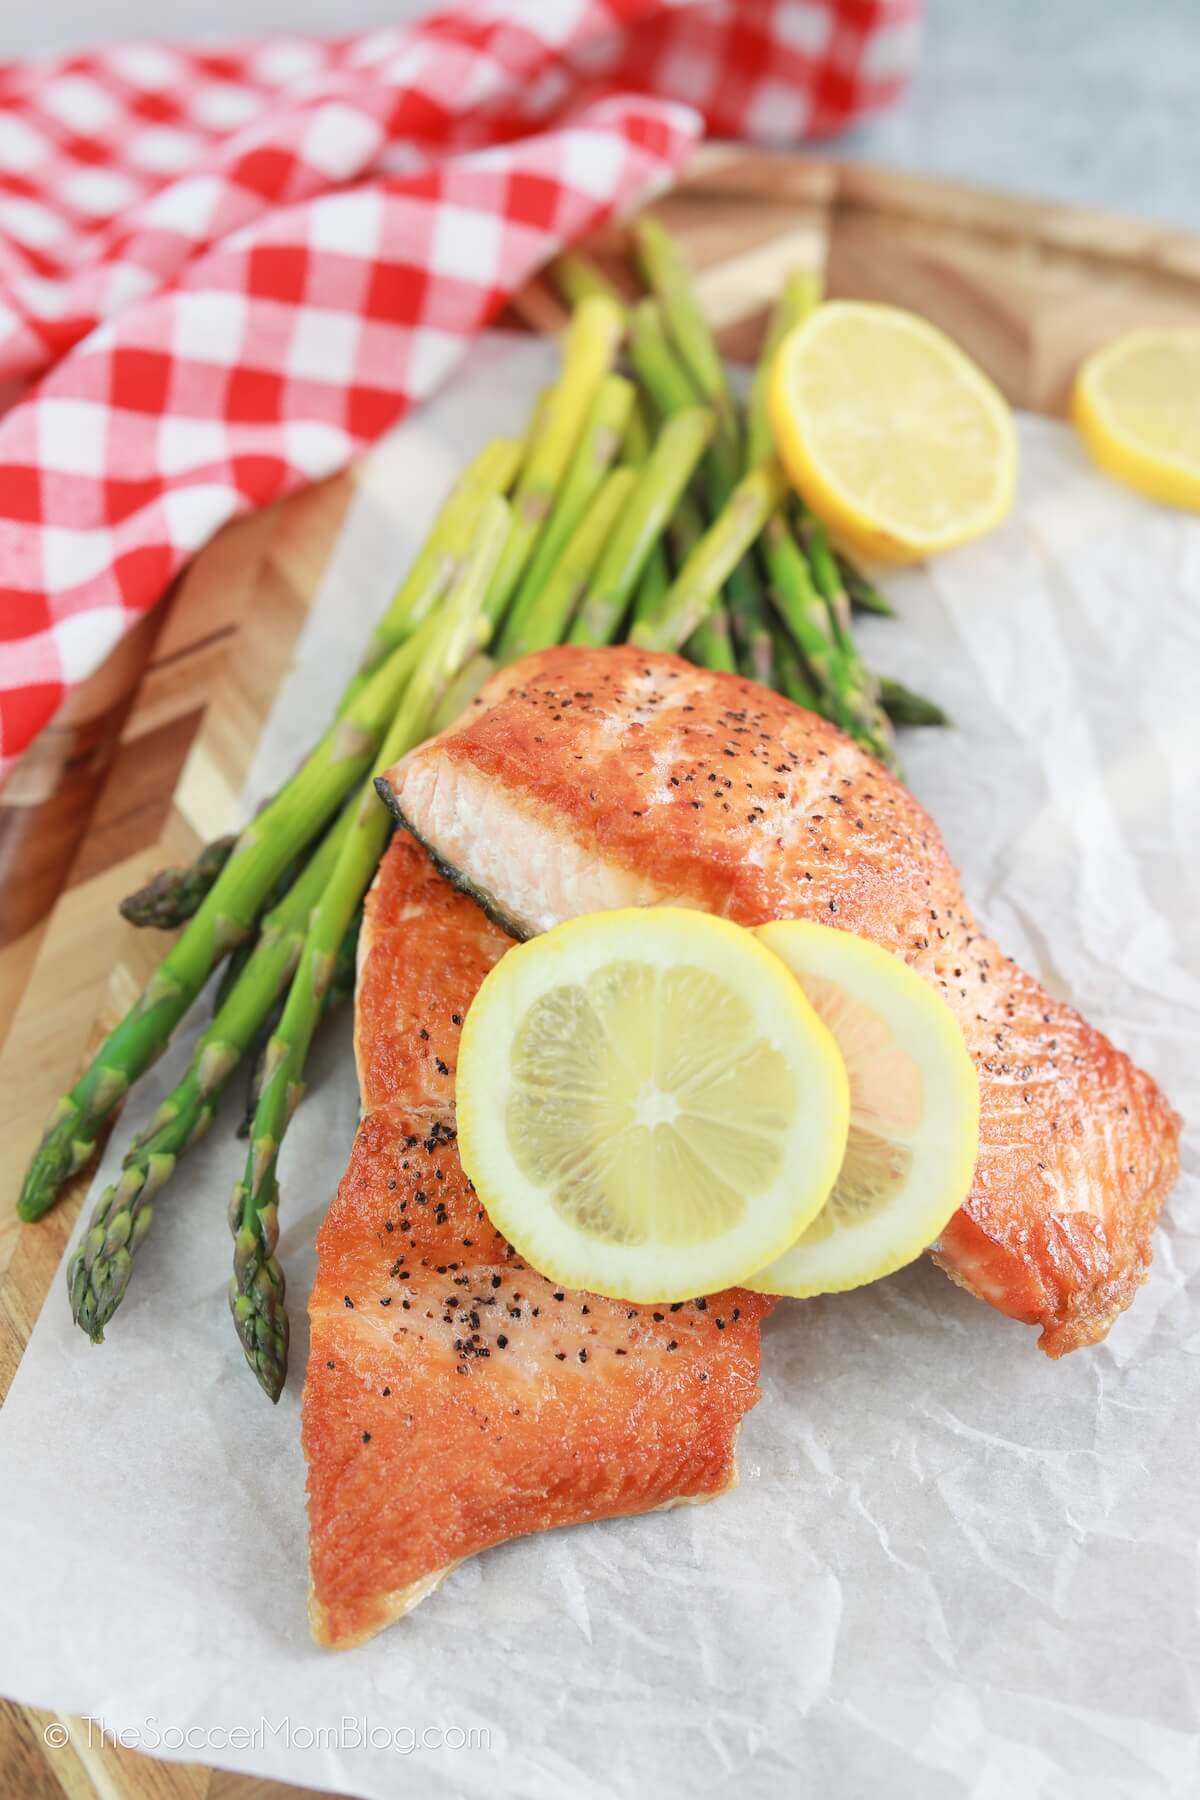 Tasty Tips for Perfectly Cooked Salmon